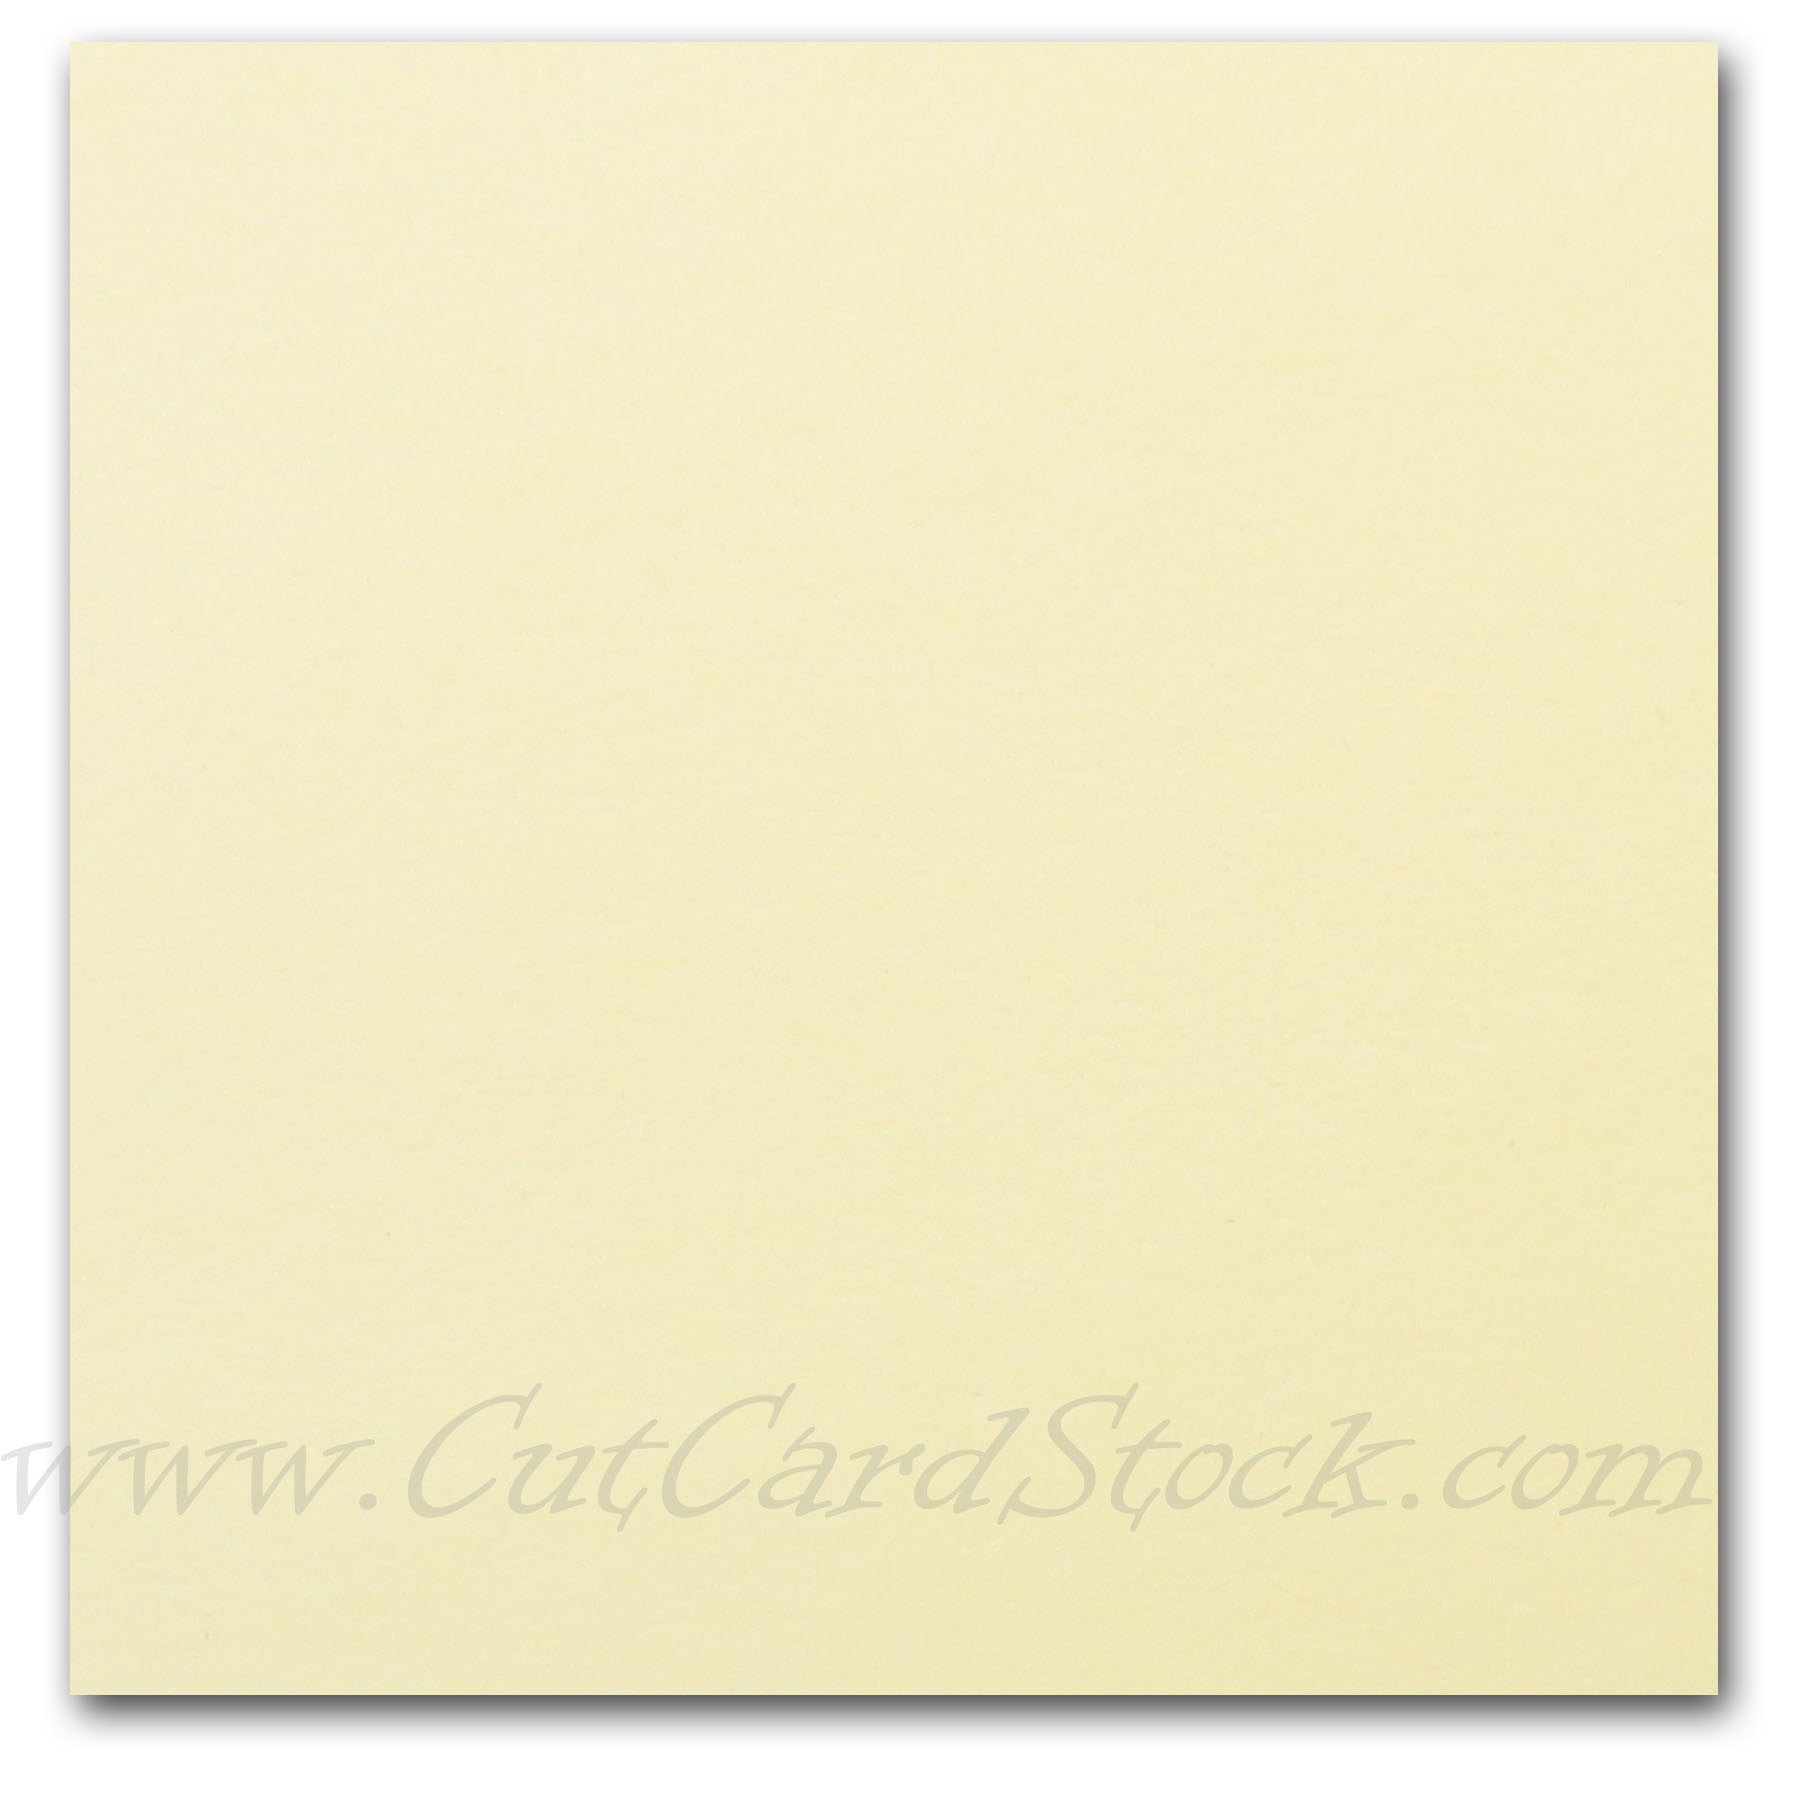 GetUSCart- Springhill White 11? x 17? Cardstock Paper, 90lb, 163gsm, 250  Sheets (1 Ream) - Premium Lightweight Cardstock, Printer Paper with Smooth  Finish for Greeting Cards, Flyers, Scrapbooking - 015110R